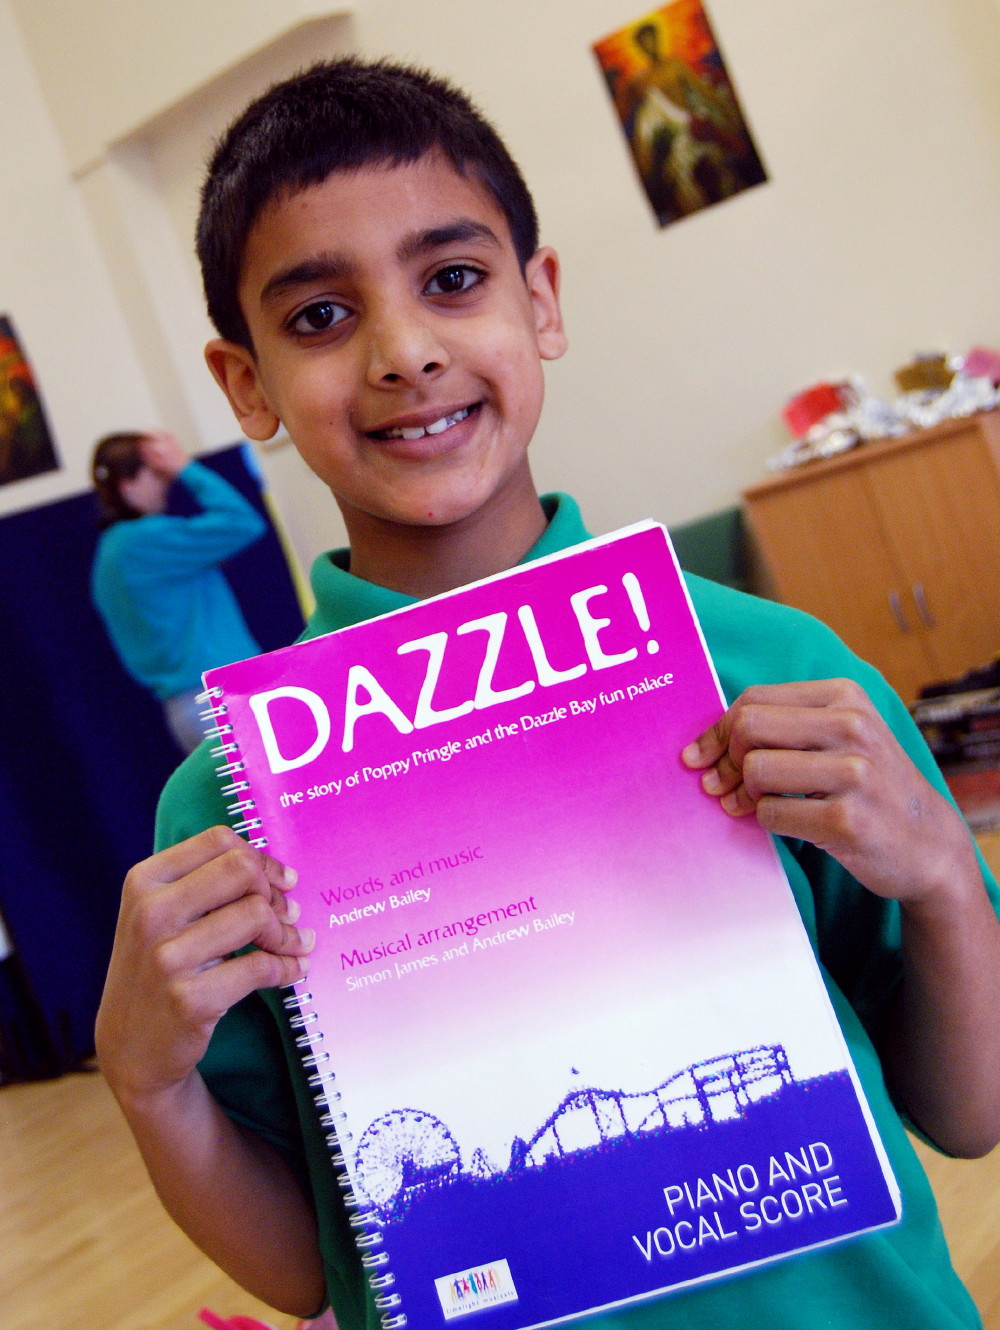 A young member of the Carmel Thomas Youth Singers and the score from Dazzle, the children's musical 